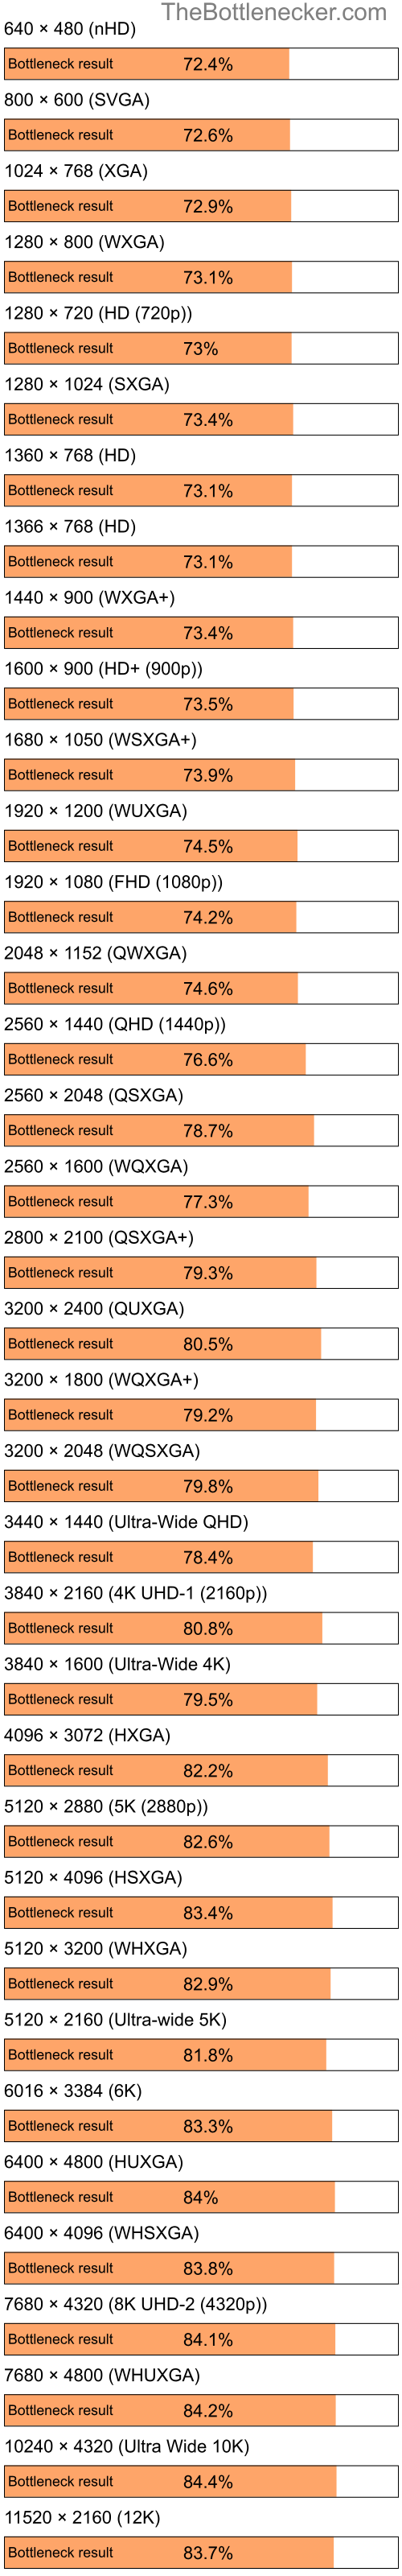 Bottleneck results by resolution for Intel Atom Z520 and NVIDIA Quadro NVS 110M in General Tasks